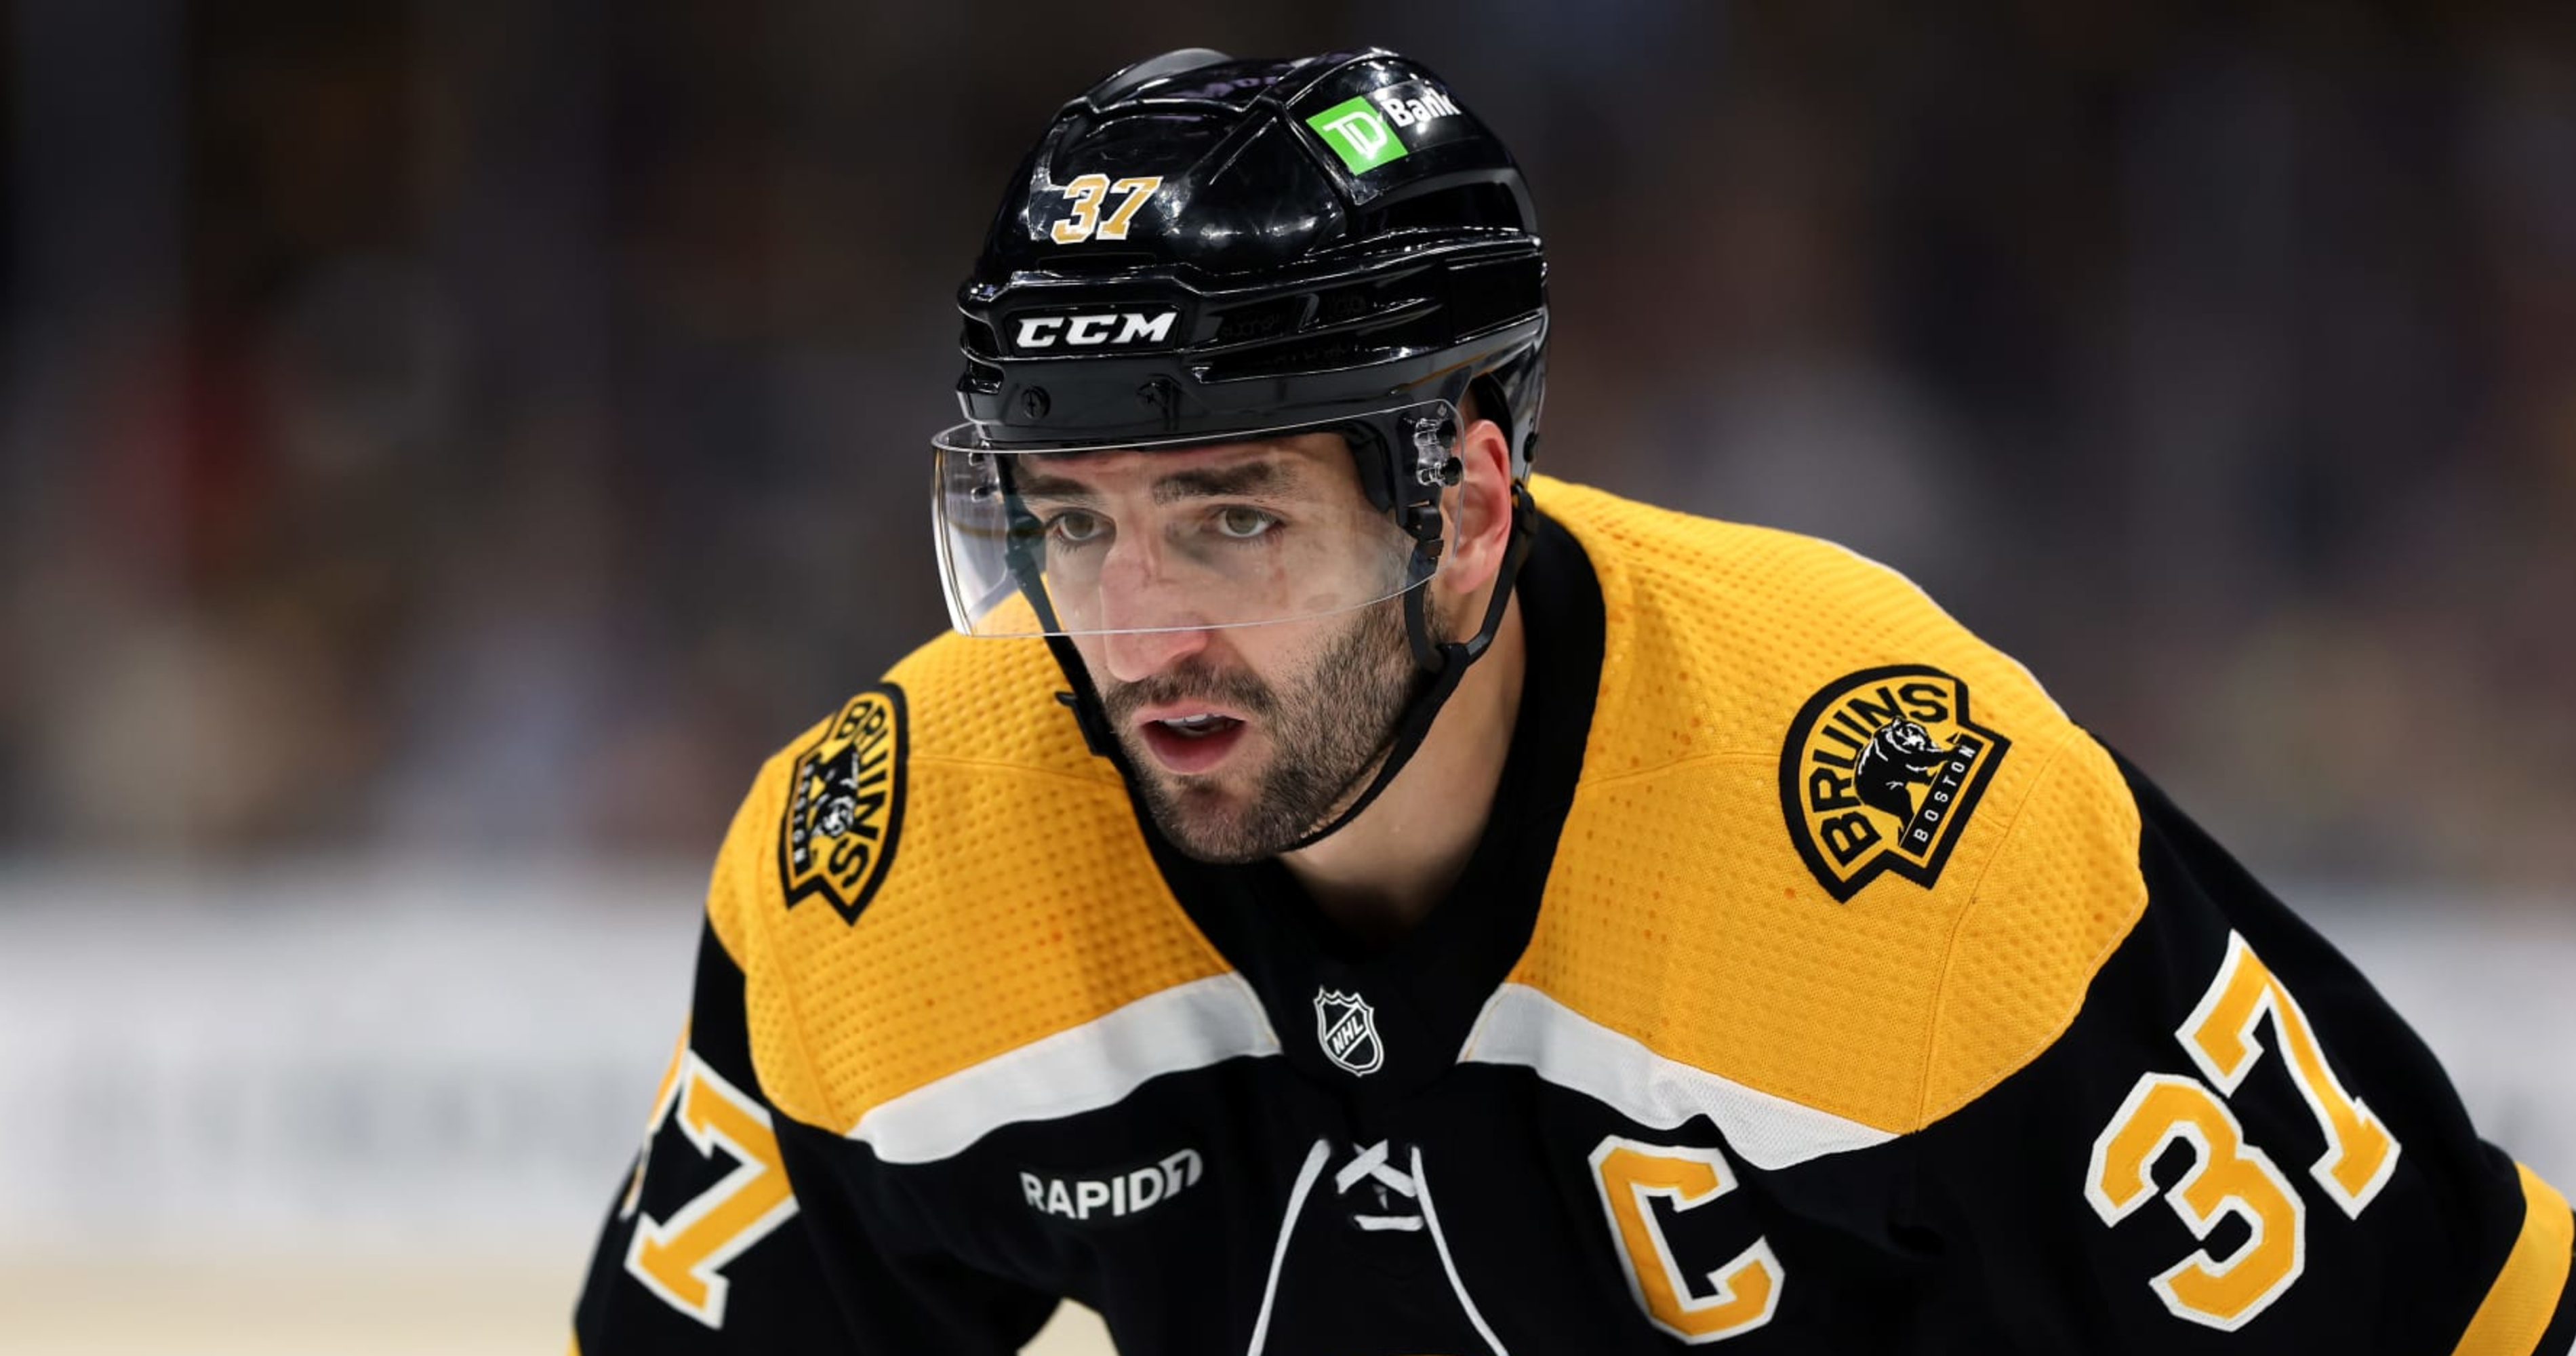 We now have the full details for Patrice Bergeron's new contract